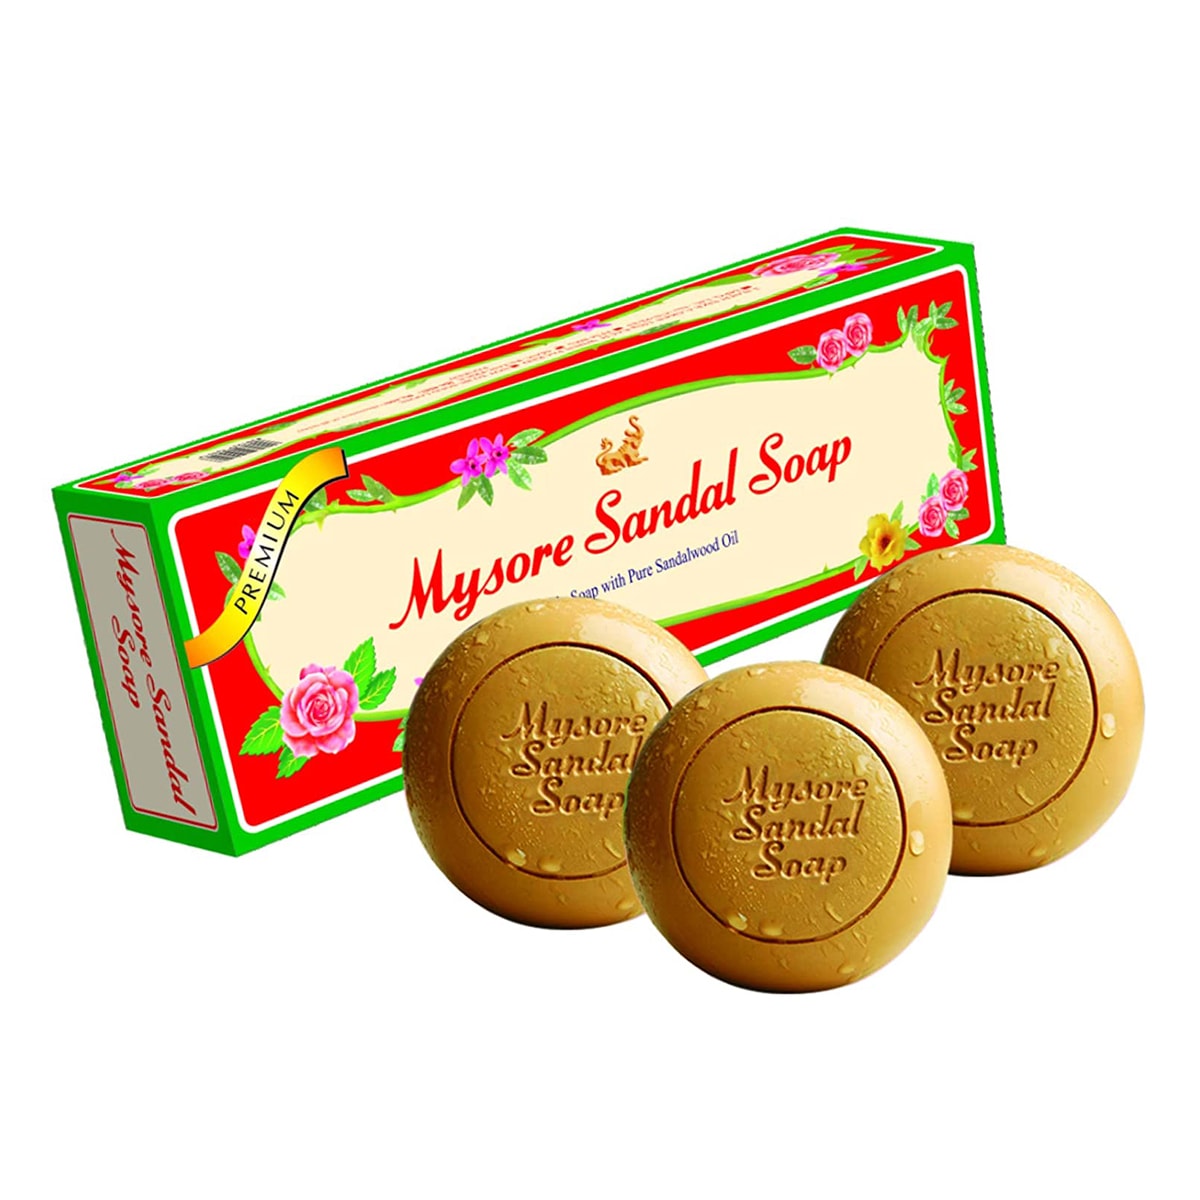 Buy Mysore Sandal Soap Gift Pack of 3 with Pure Sandalwood Oil - 450 gm